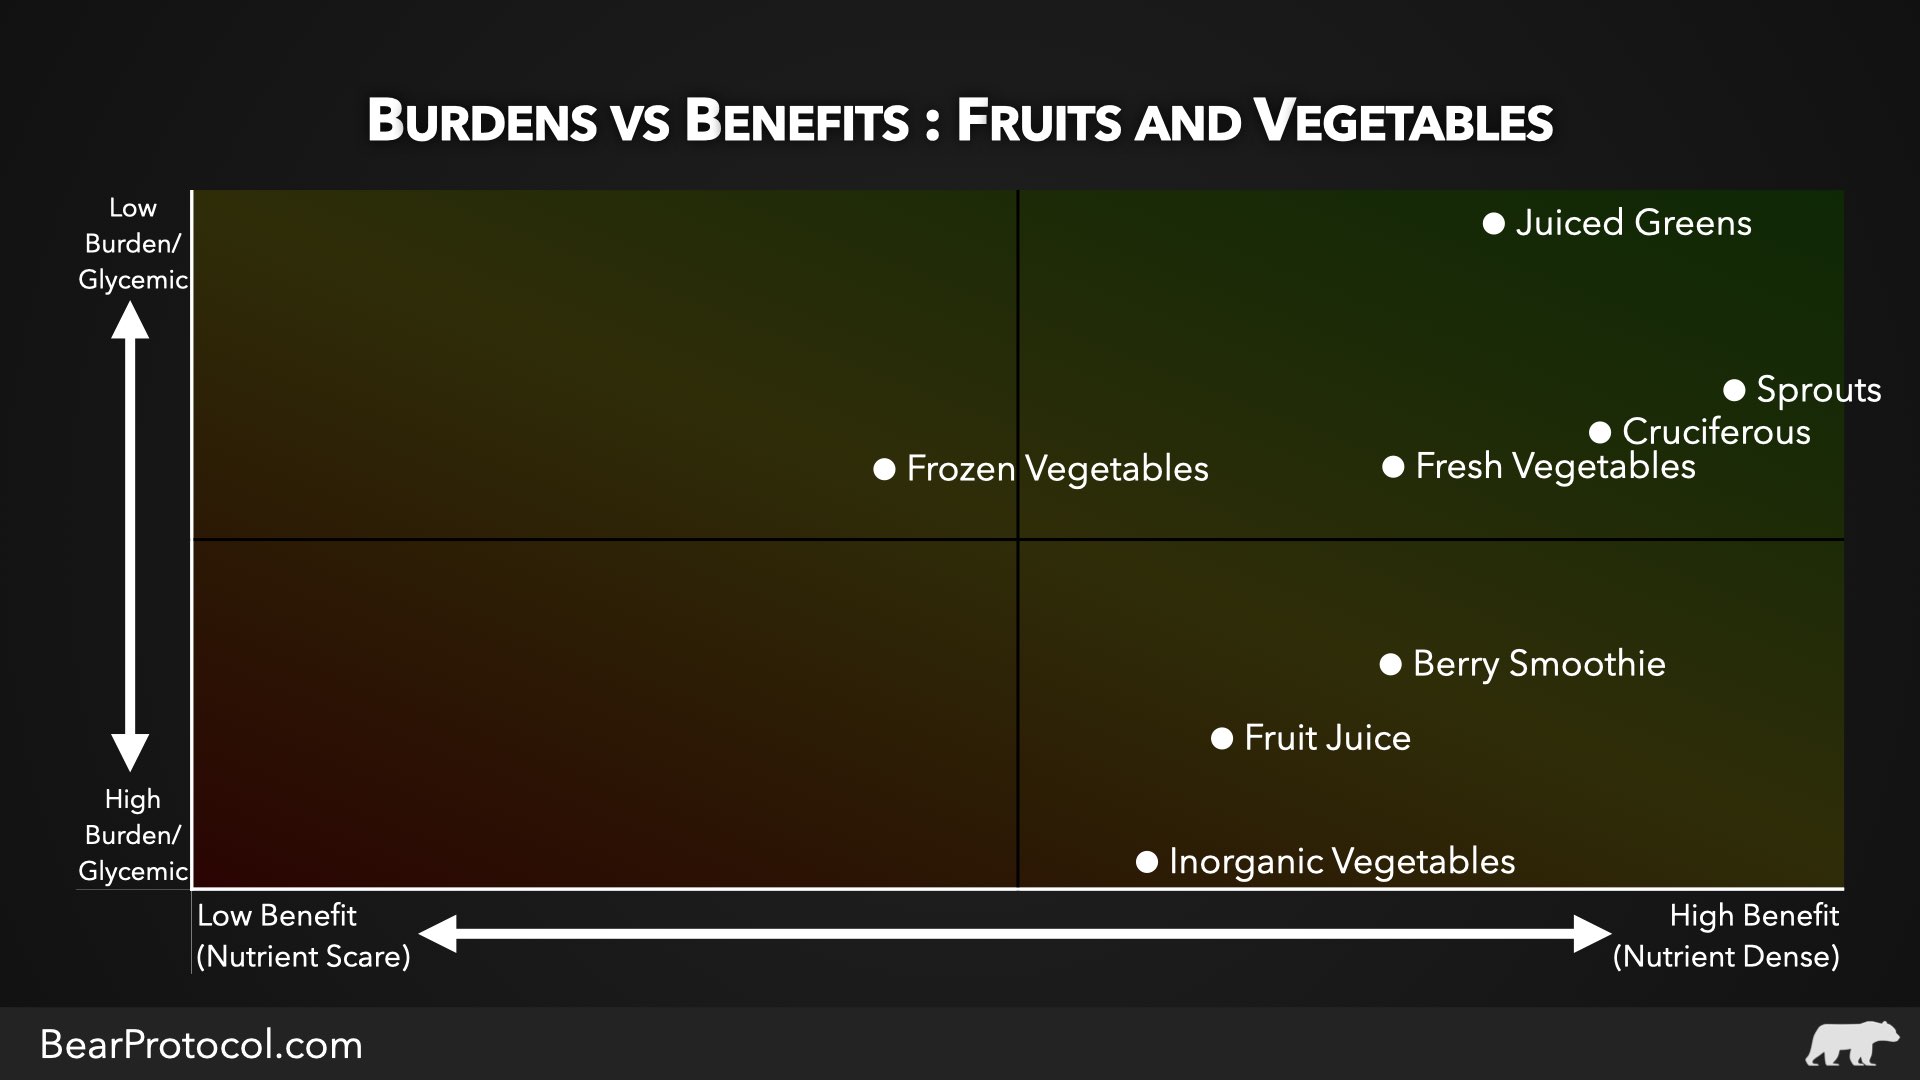 Healthy ways to eat fruits and vegetables